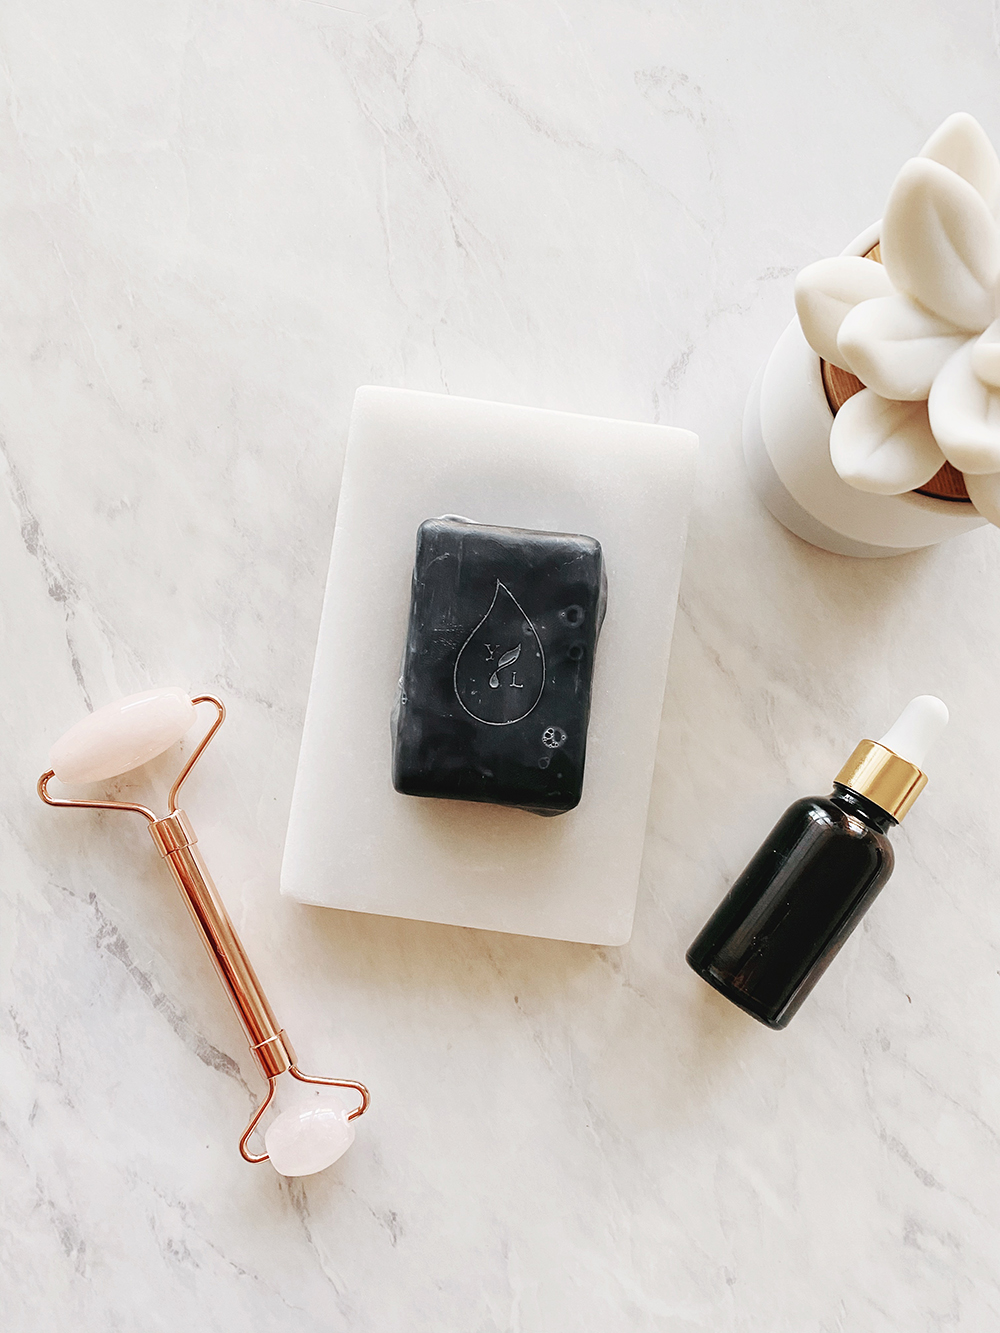 Chatting all about five benefits of charcoal for your skin along with ridding ourselves of toxic products. Catch it right here! #CharcoalForSkin #CharcoalForSkinBenefits #CleanBeauty #NonToxicBeauty #CharcoalSkincare #ActivatedCharcoalForSkinBenefits #YoungLiving #EssentialOils